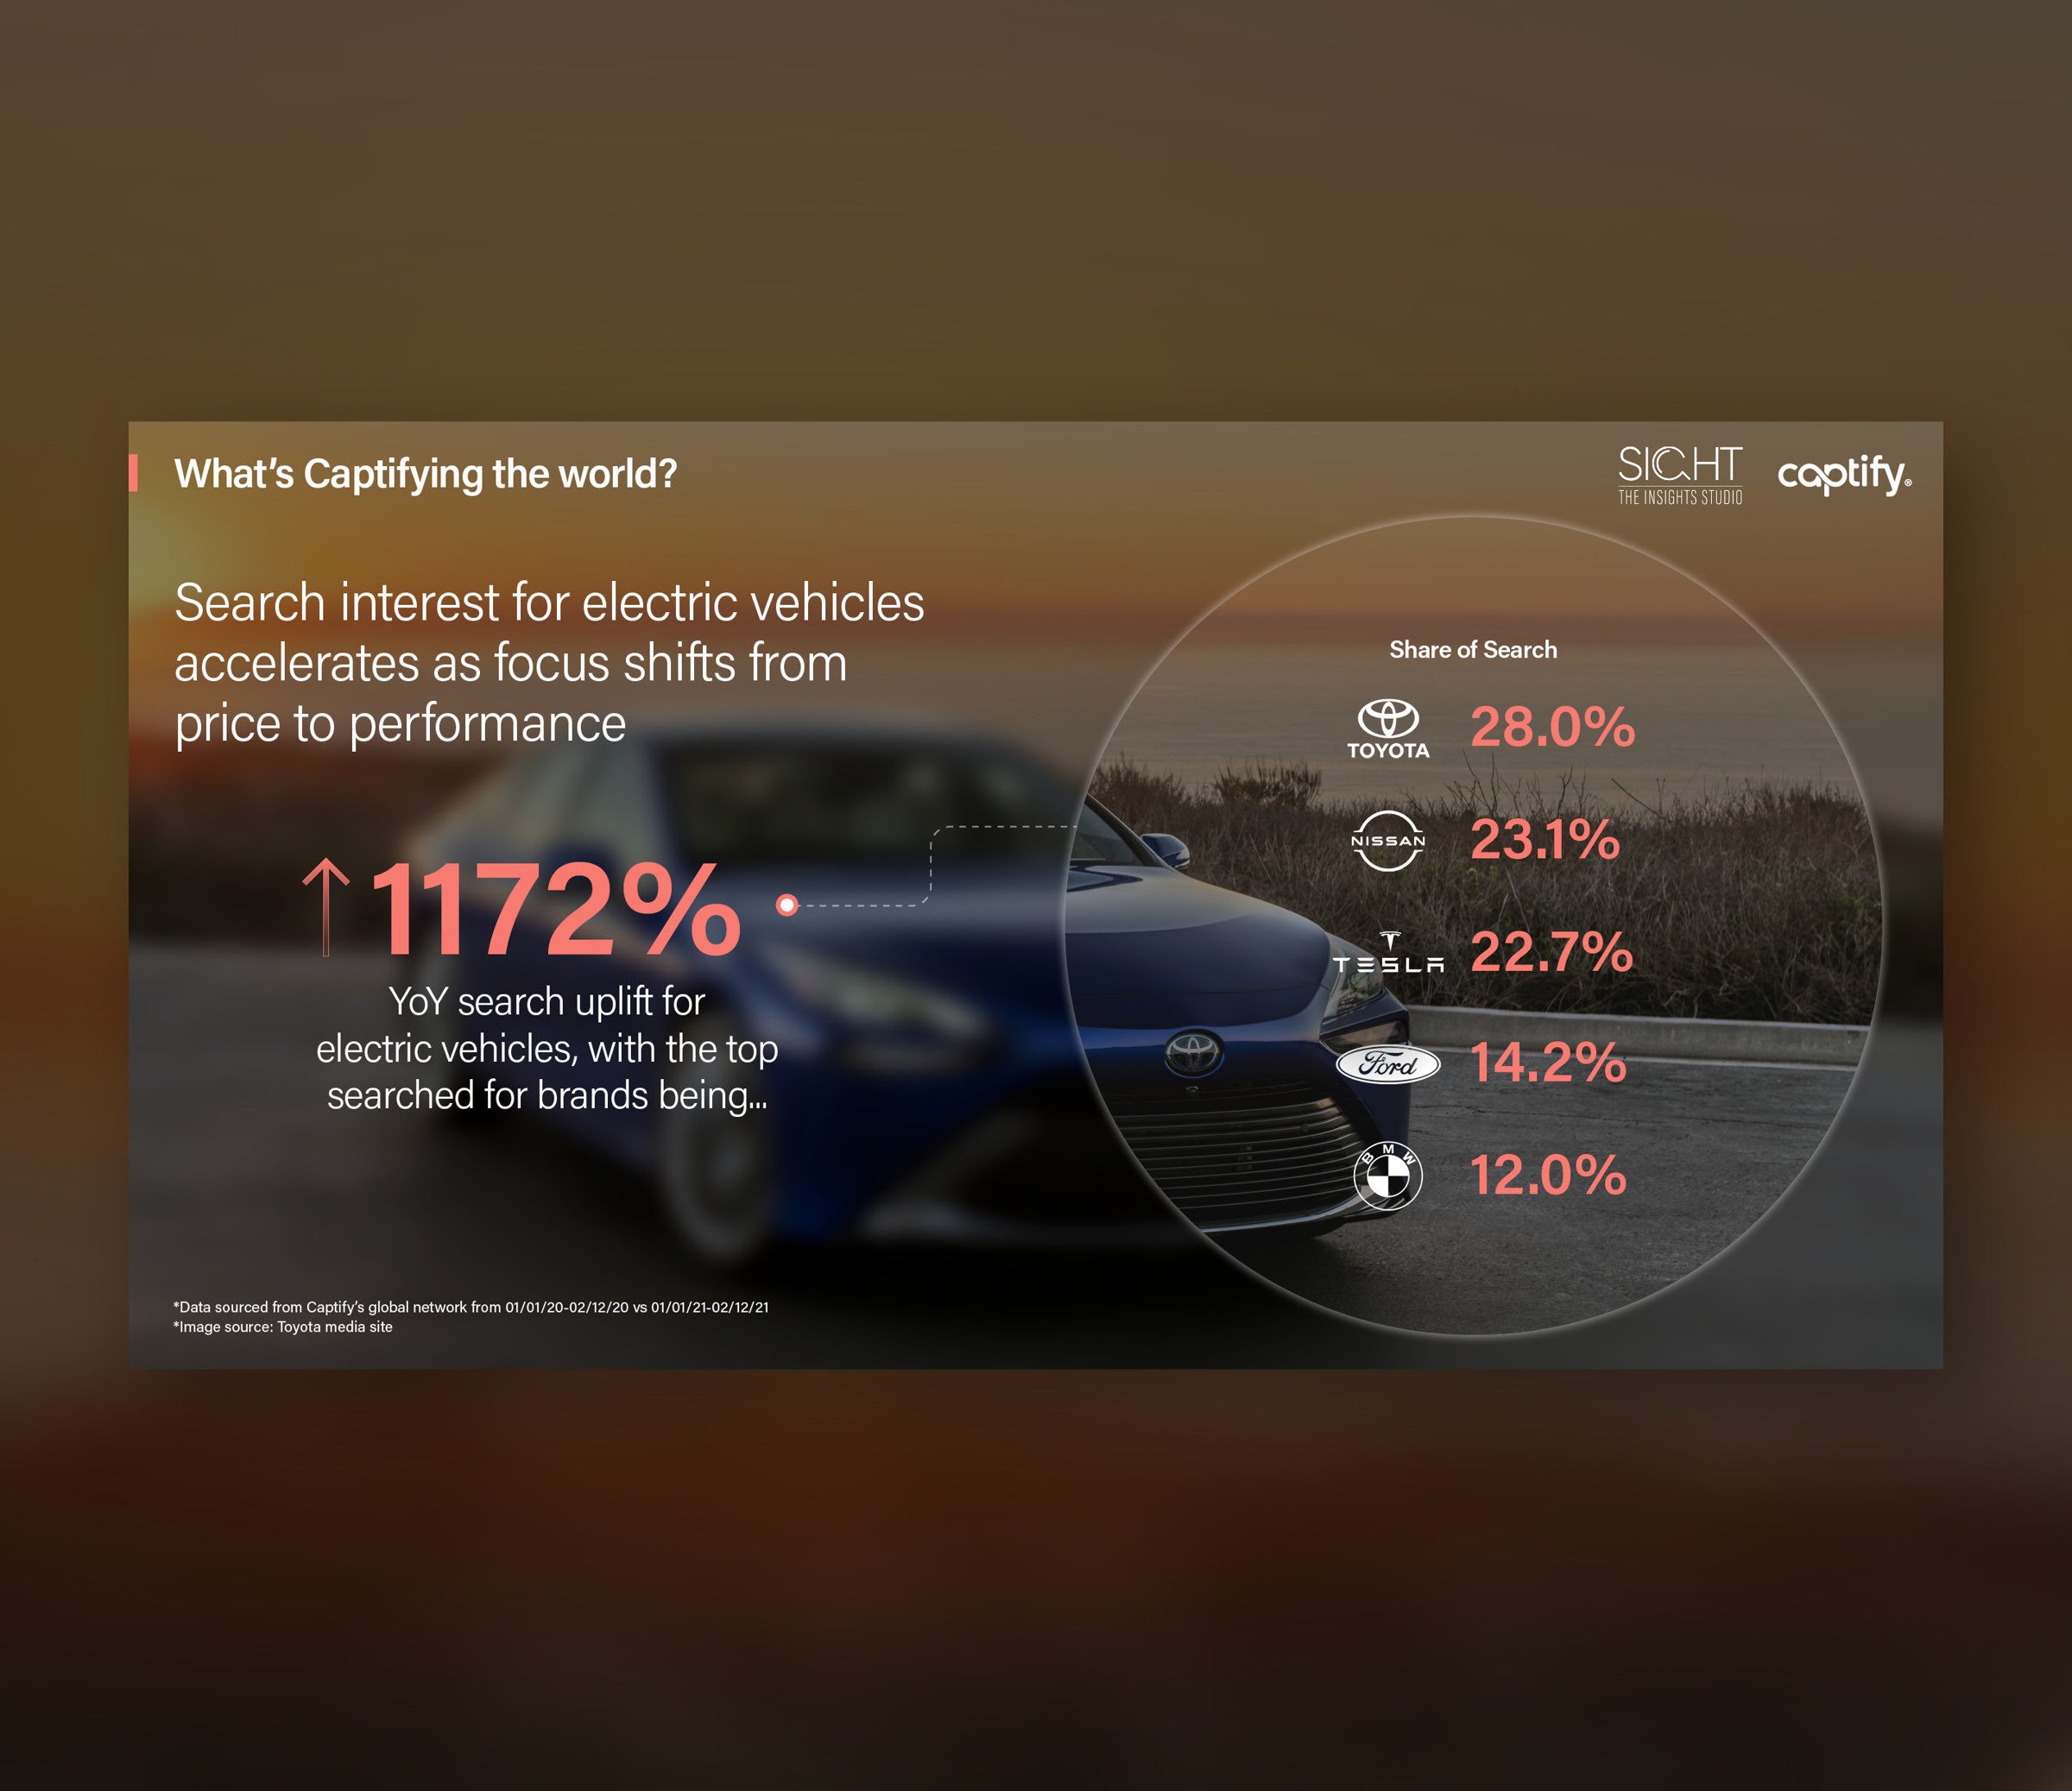 What’s Captifying the world: New launch announcements in Q1 accelerate search interest for electric vehicles, with focus shifting from price to performance